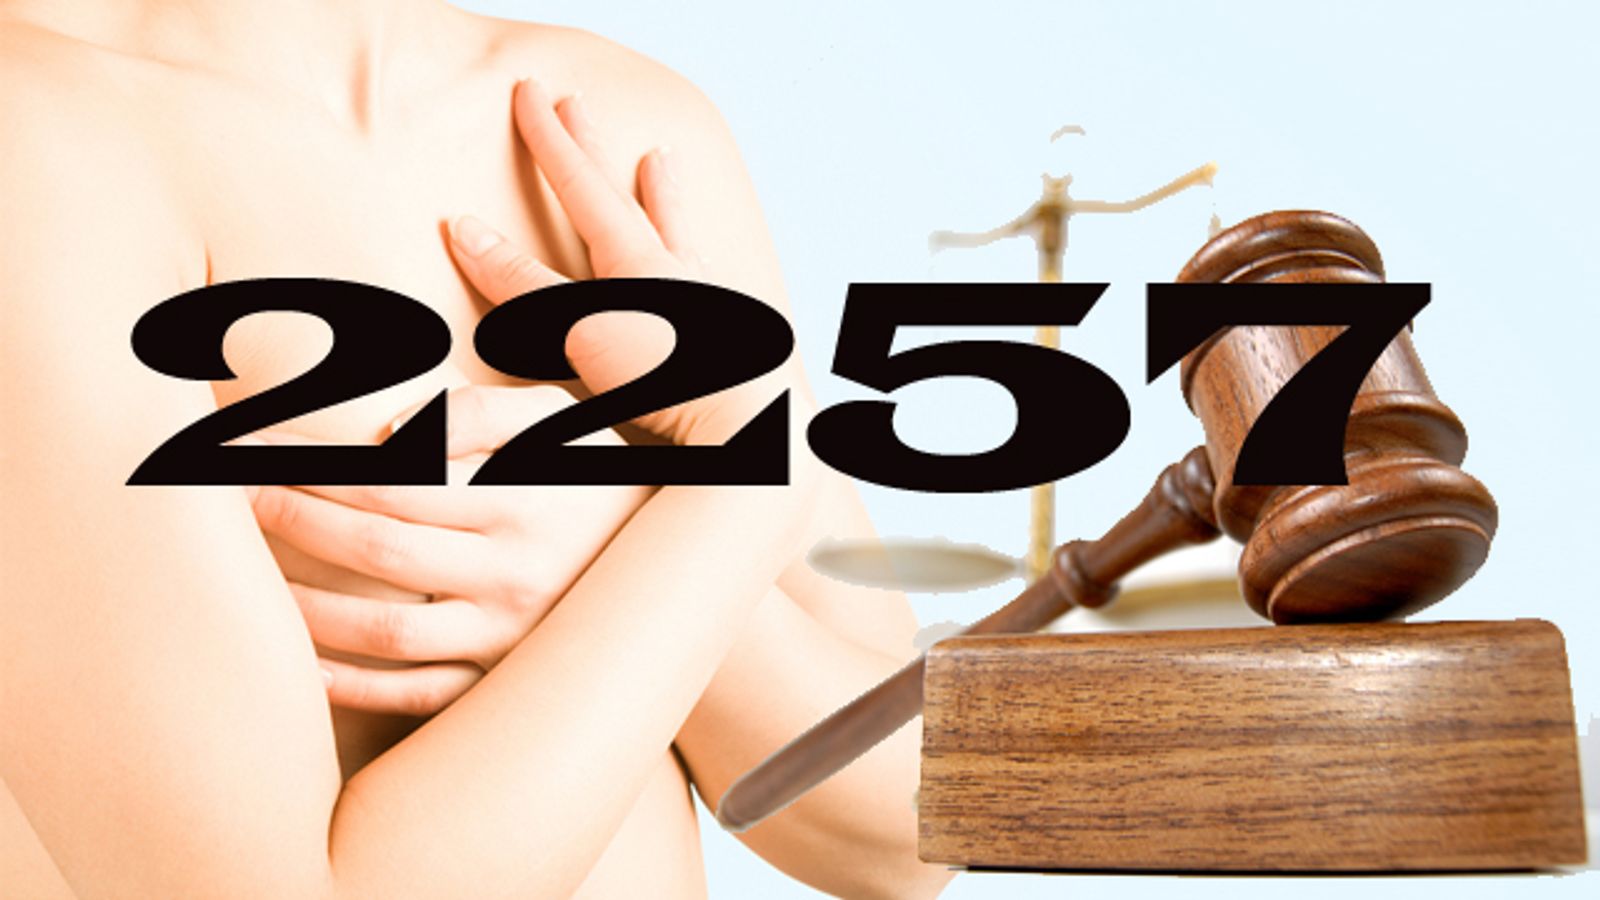 FSC: 2257 Ruling a Huge Victory for Free Speech